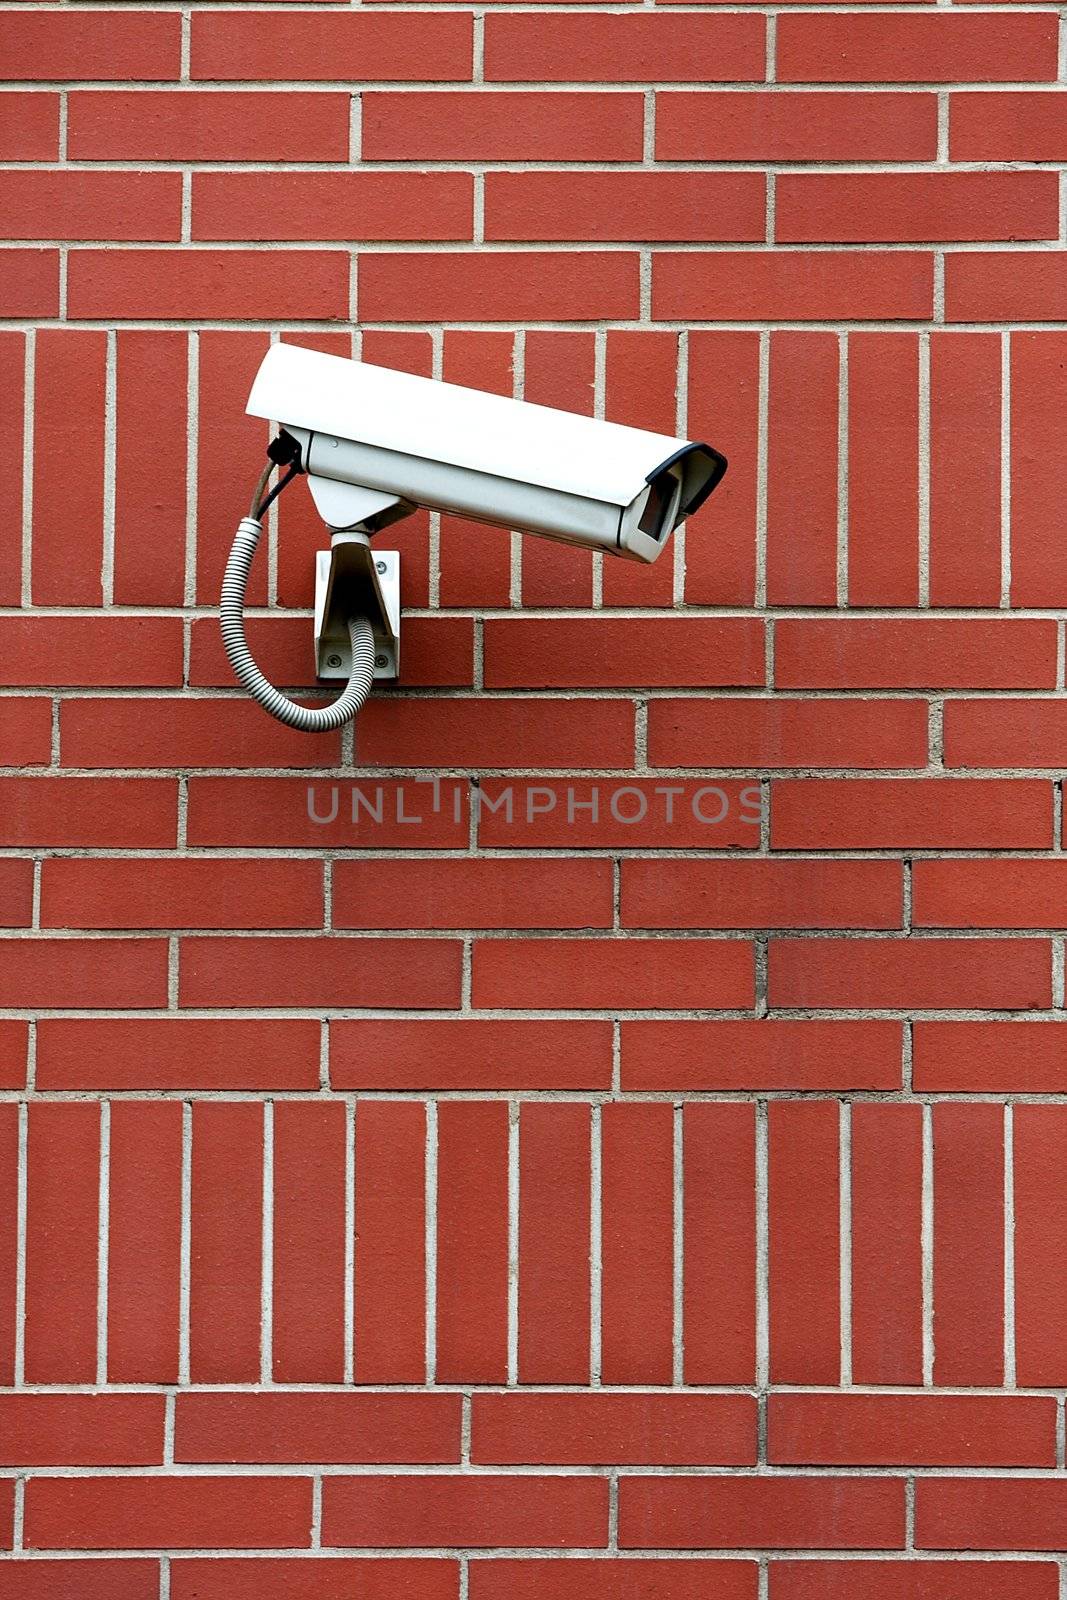 Security camera on a brick wall